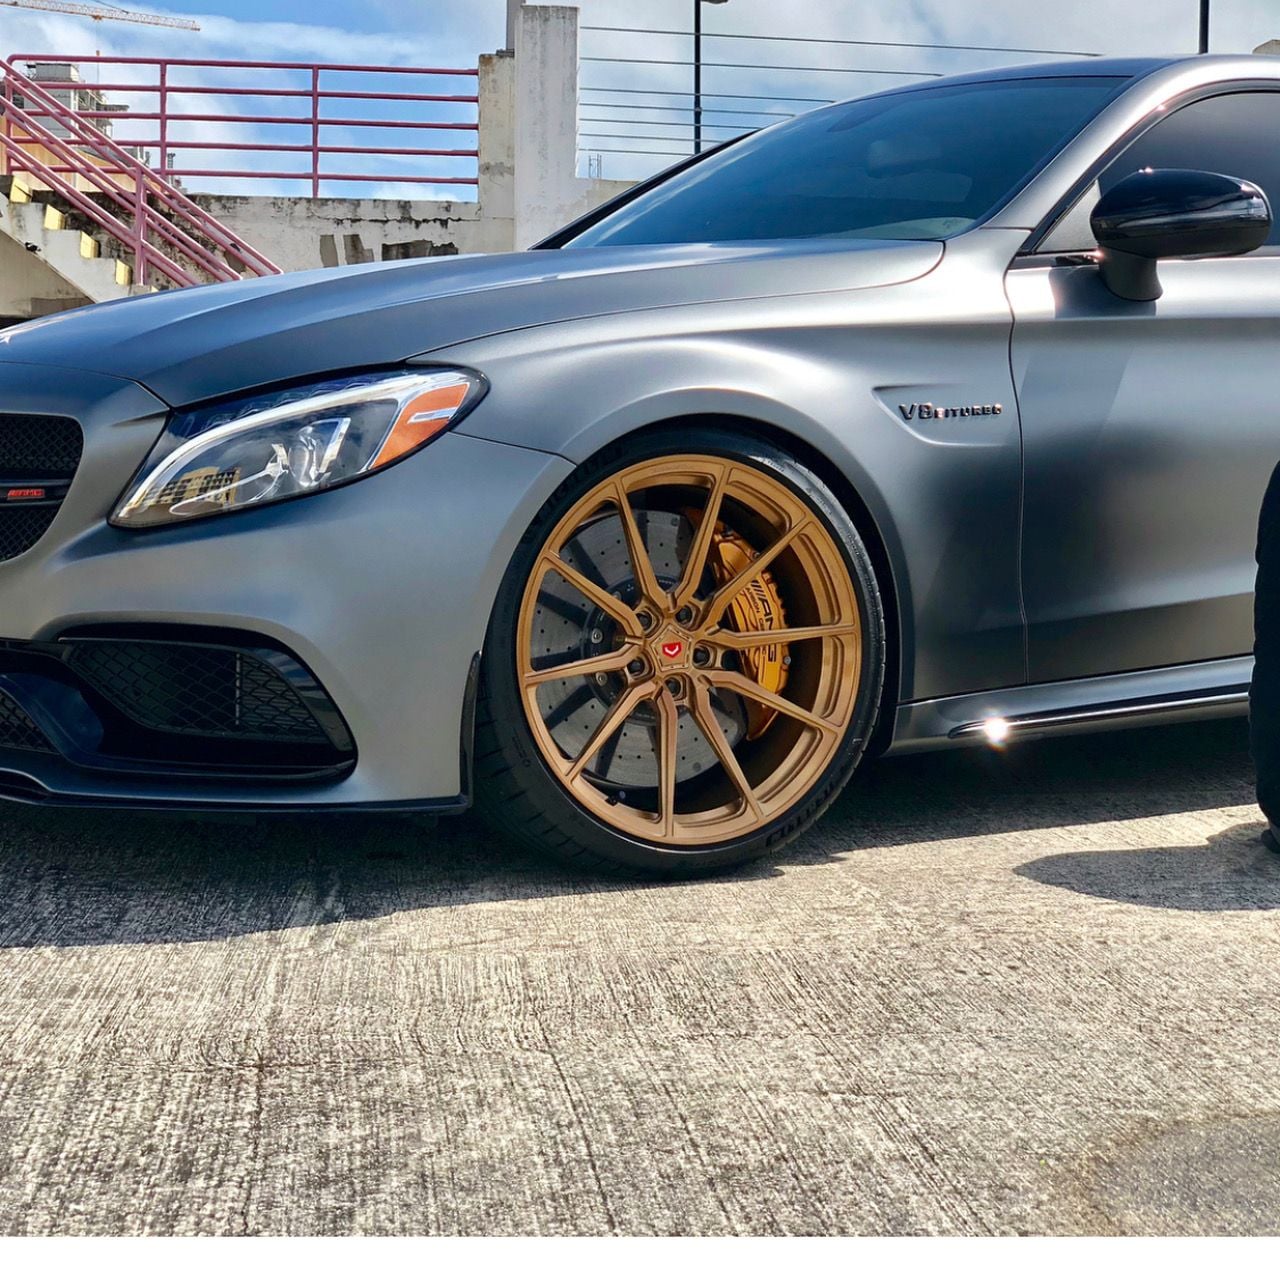 Brakes - W205 Mercedes C63s Carbon Ceramic Brakes Front, and rear with 2 piece Floating rotors - Used - 2018 to 2019 Mercedes-Benz C63 AMG S - Miami, FL 33185, United States